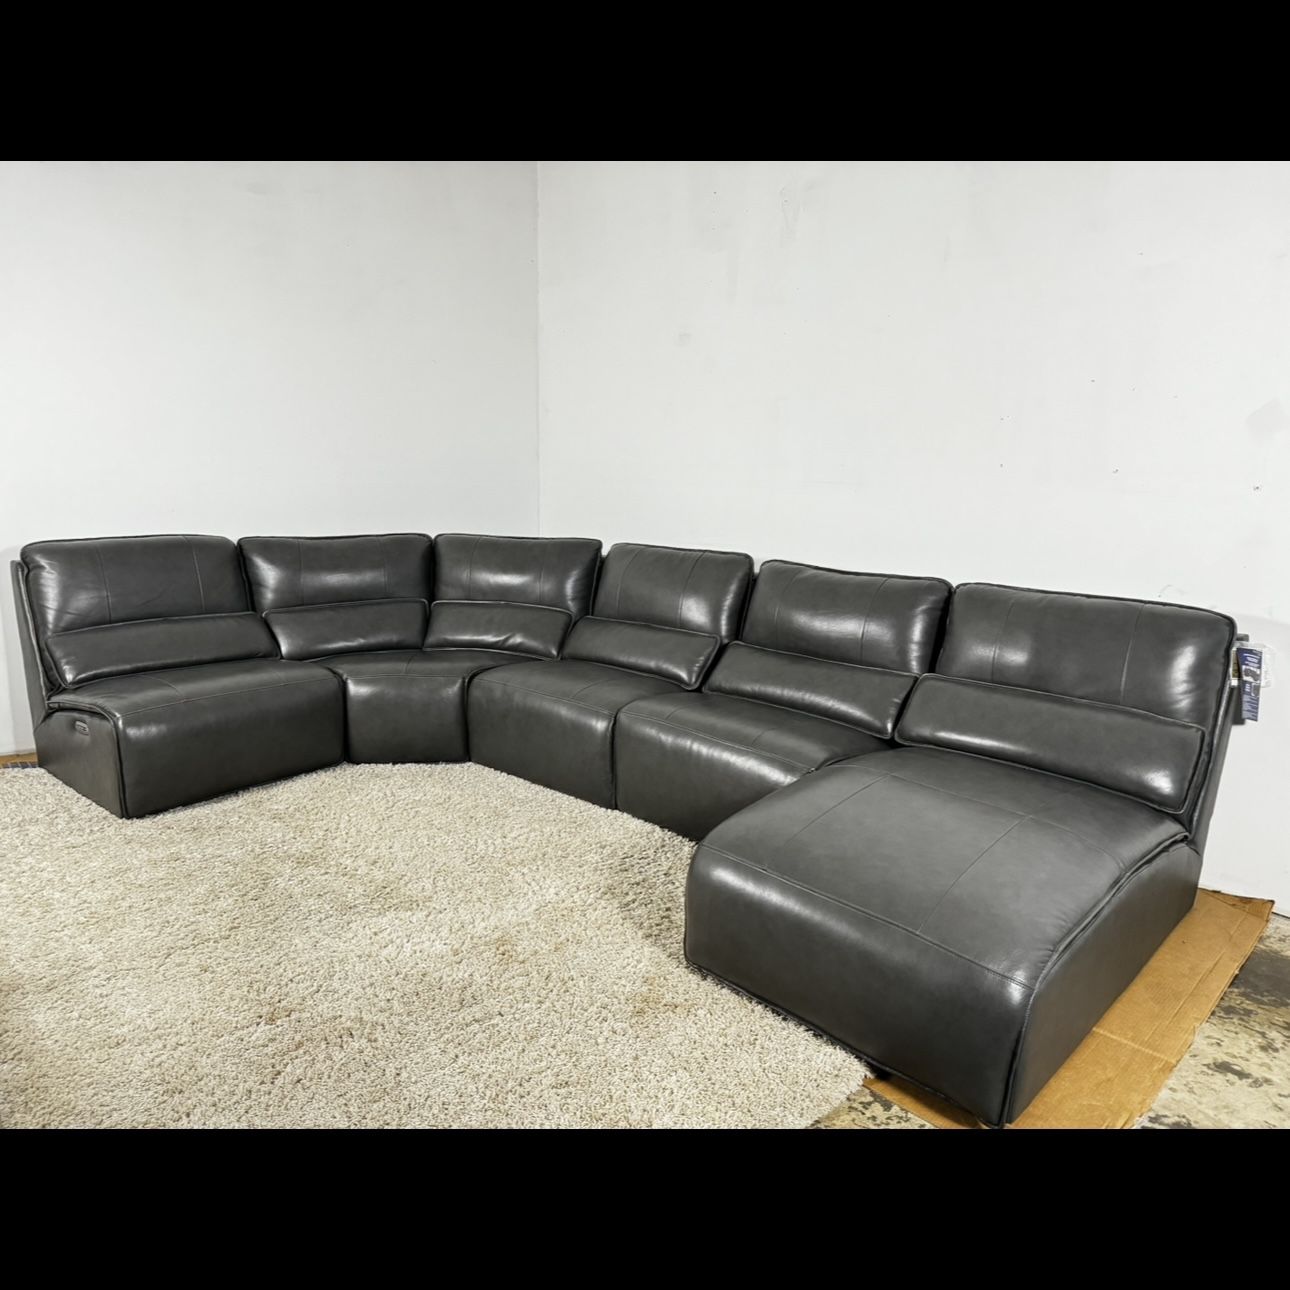 Leather Sectional Couch Sofa (Delivery Available)🚚